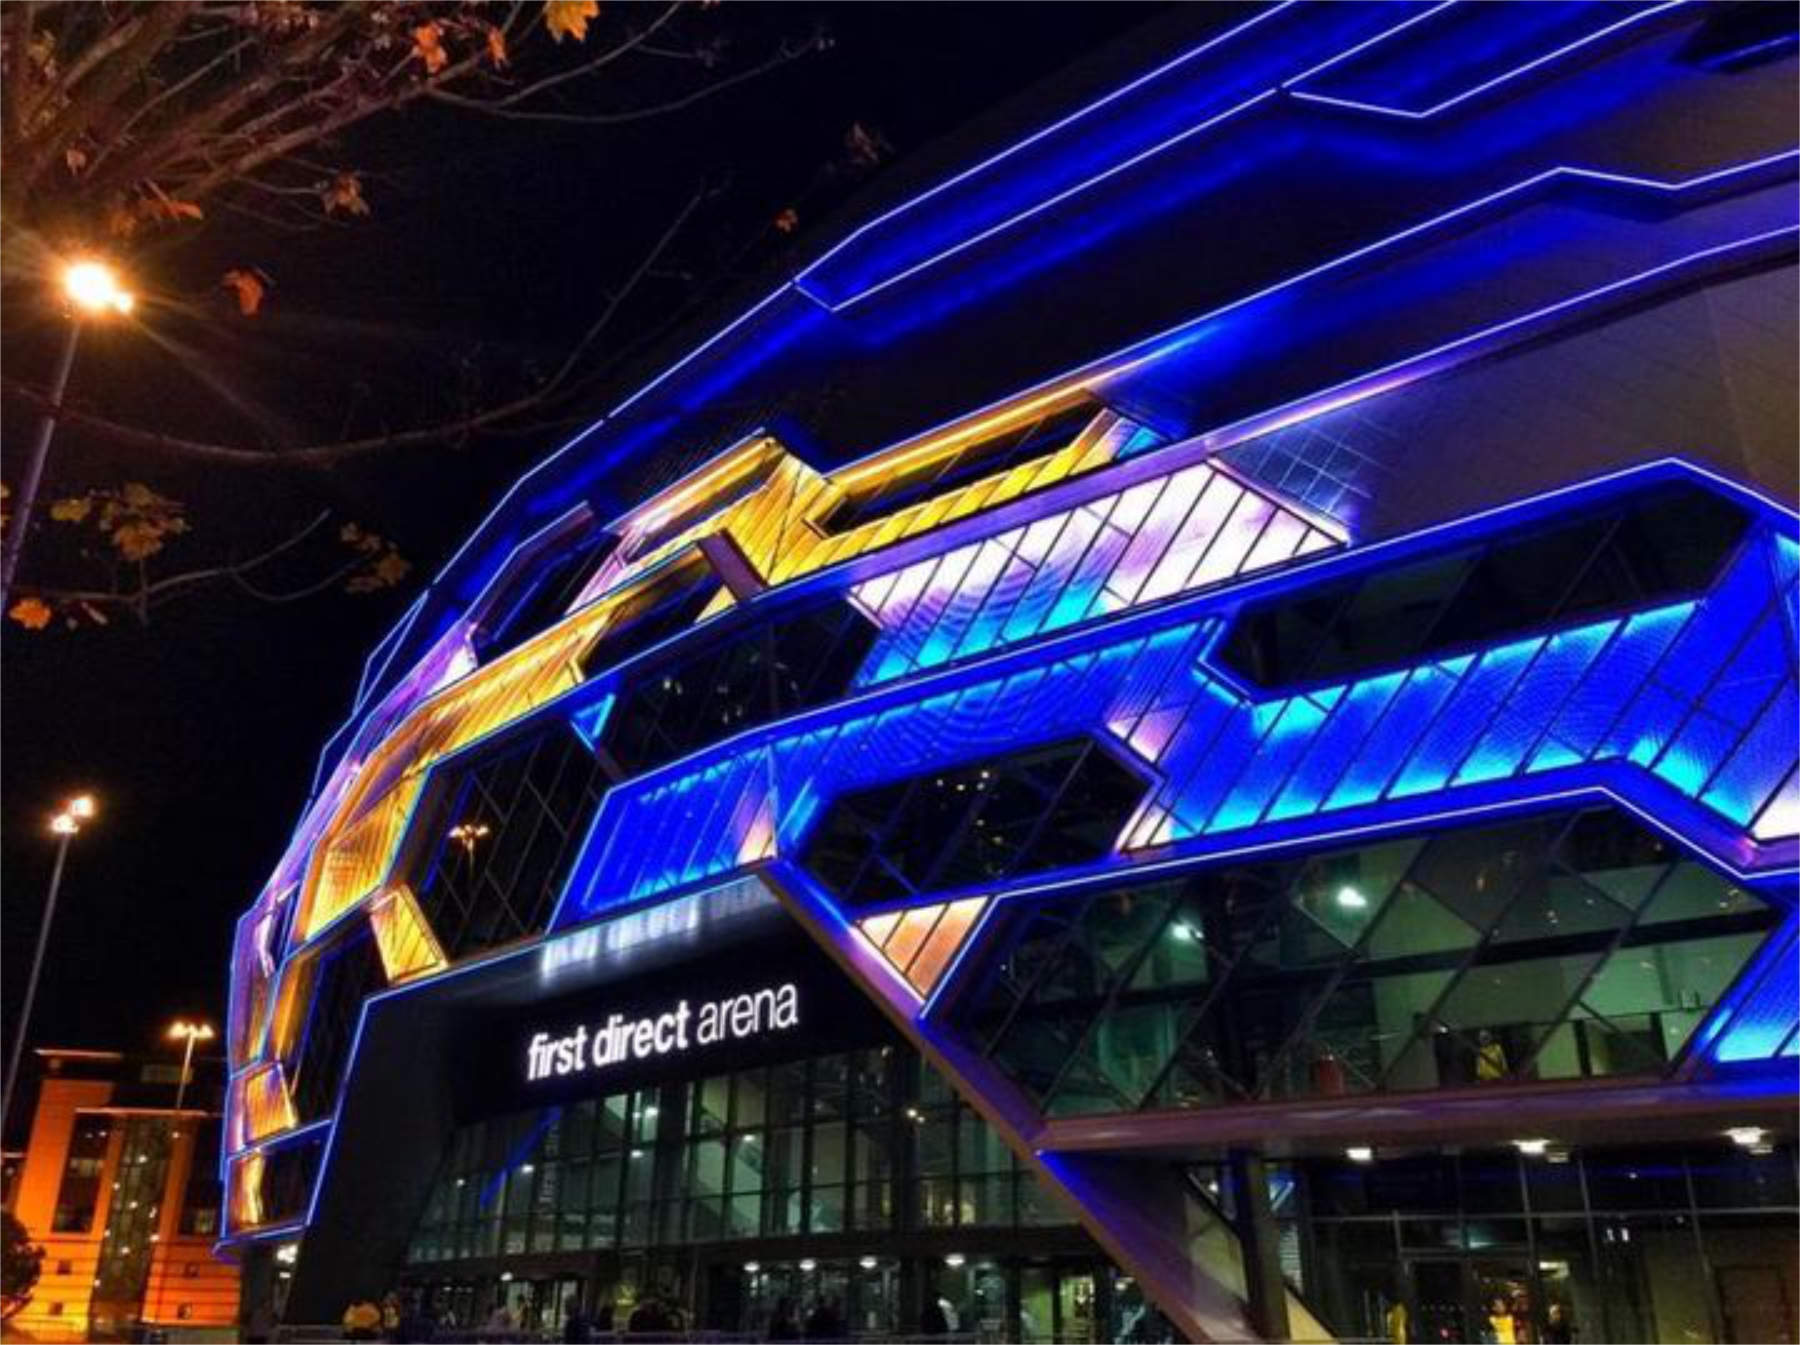 First Direct Arena, Leeds in blue and yellow